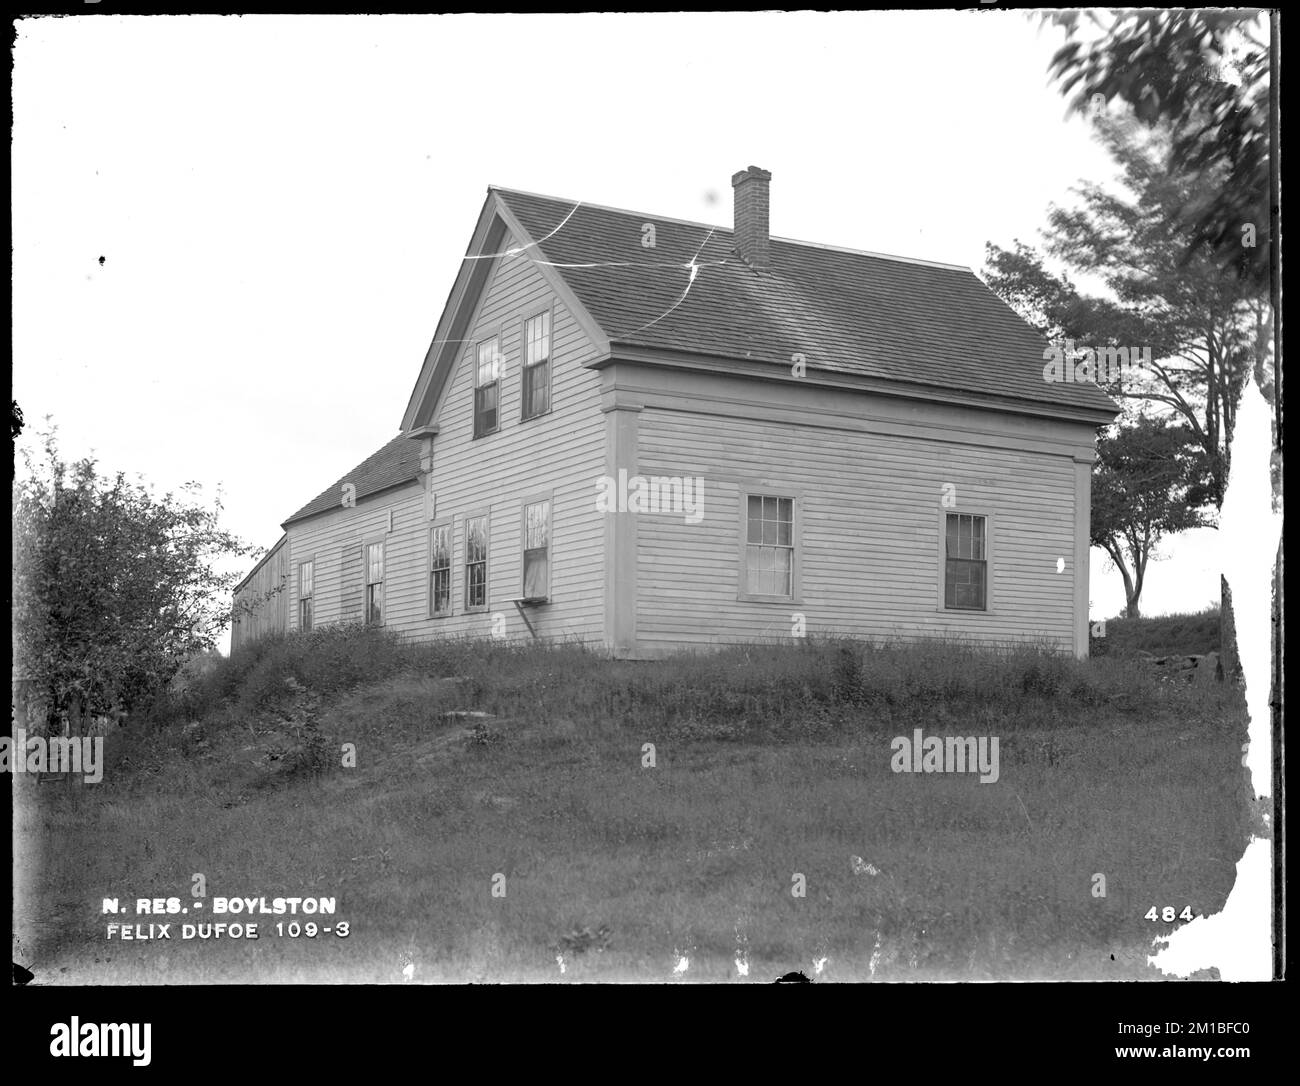 Wachusett Reservoir, Felix Dufoe's house, from the west, Boylston, Mass., Sep. 3, 1896 , waterworks, reservoirs water distribution structures, real estate Stock Photo